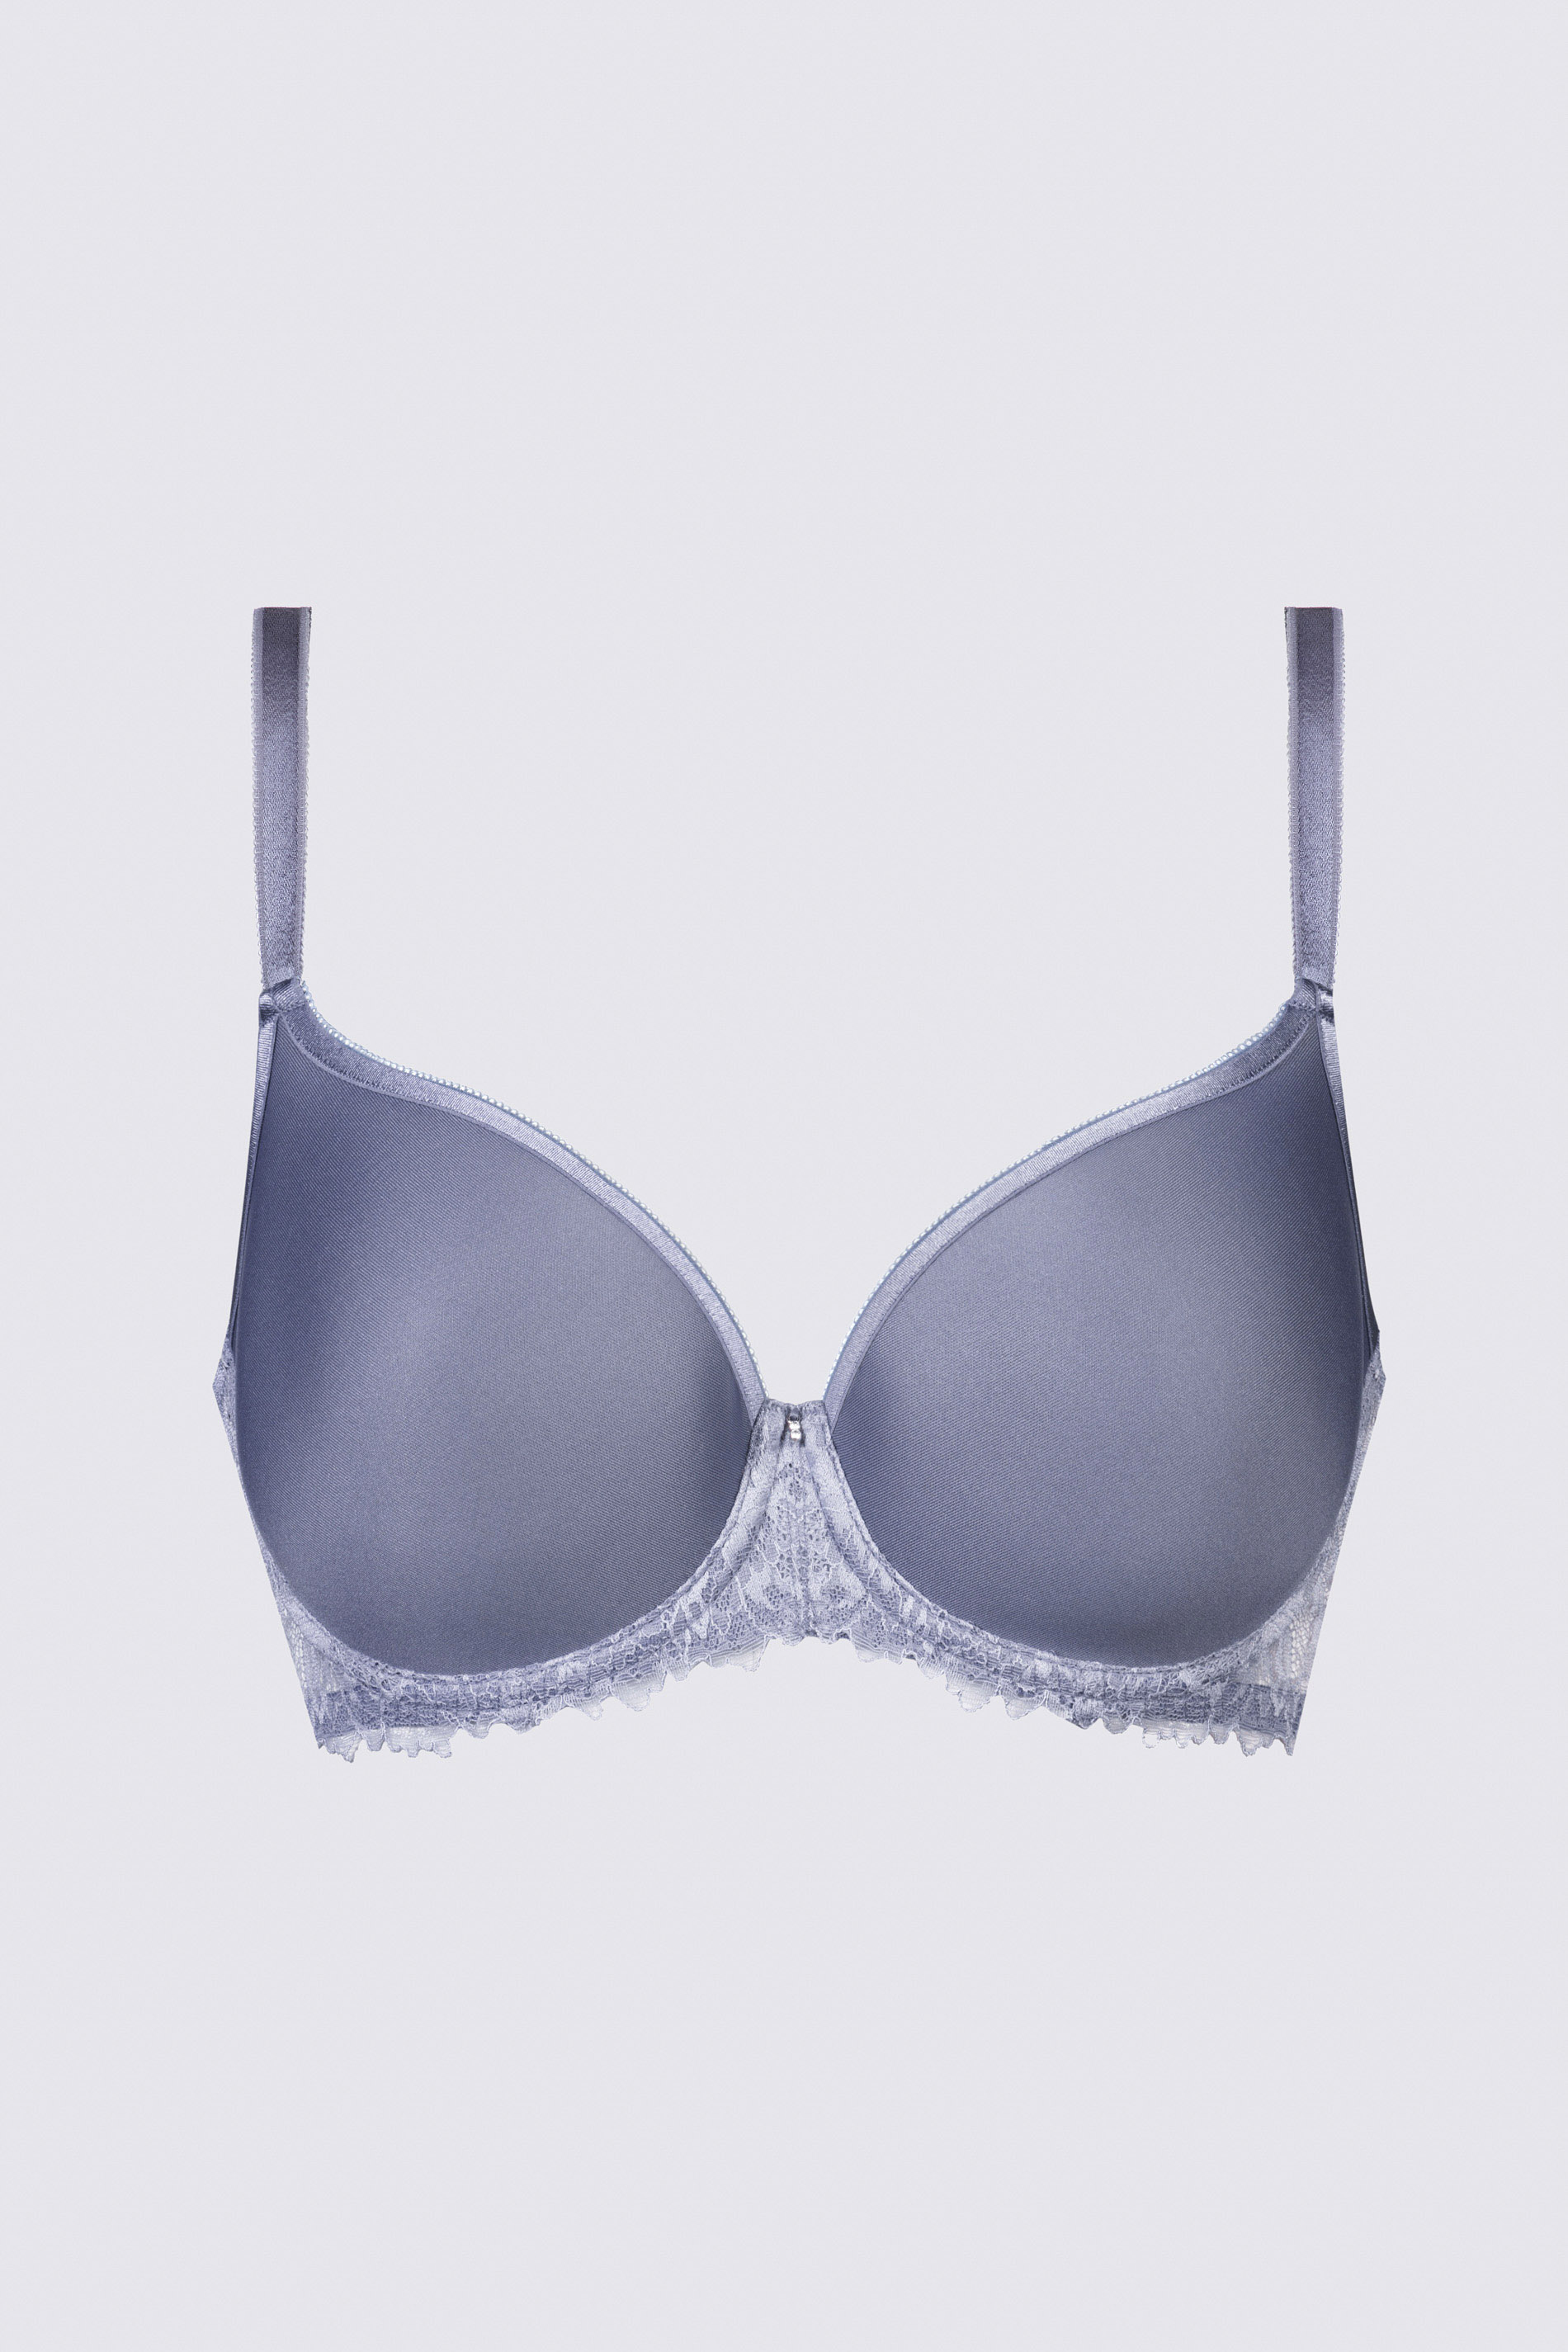 Spacer-beha | Full cup Dark Lavender Serie Luxurious Uitknippen | mey®